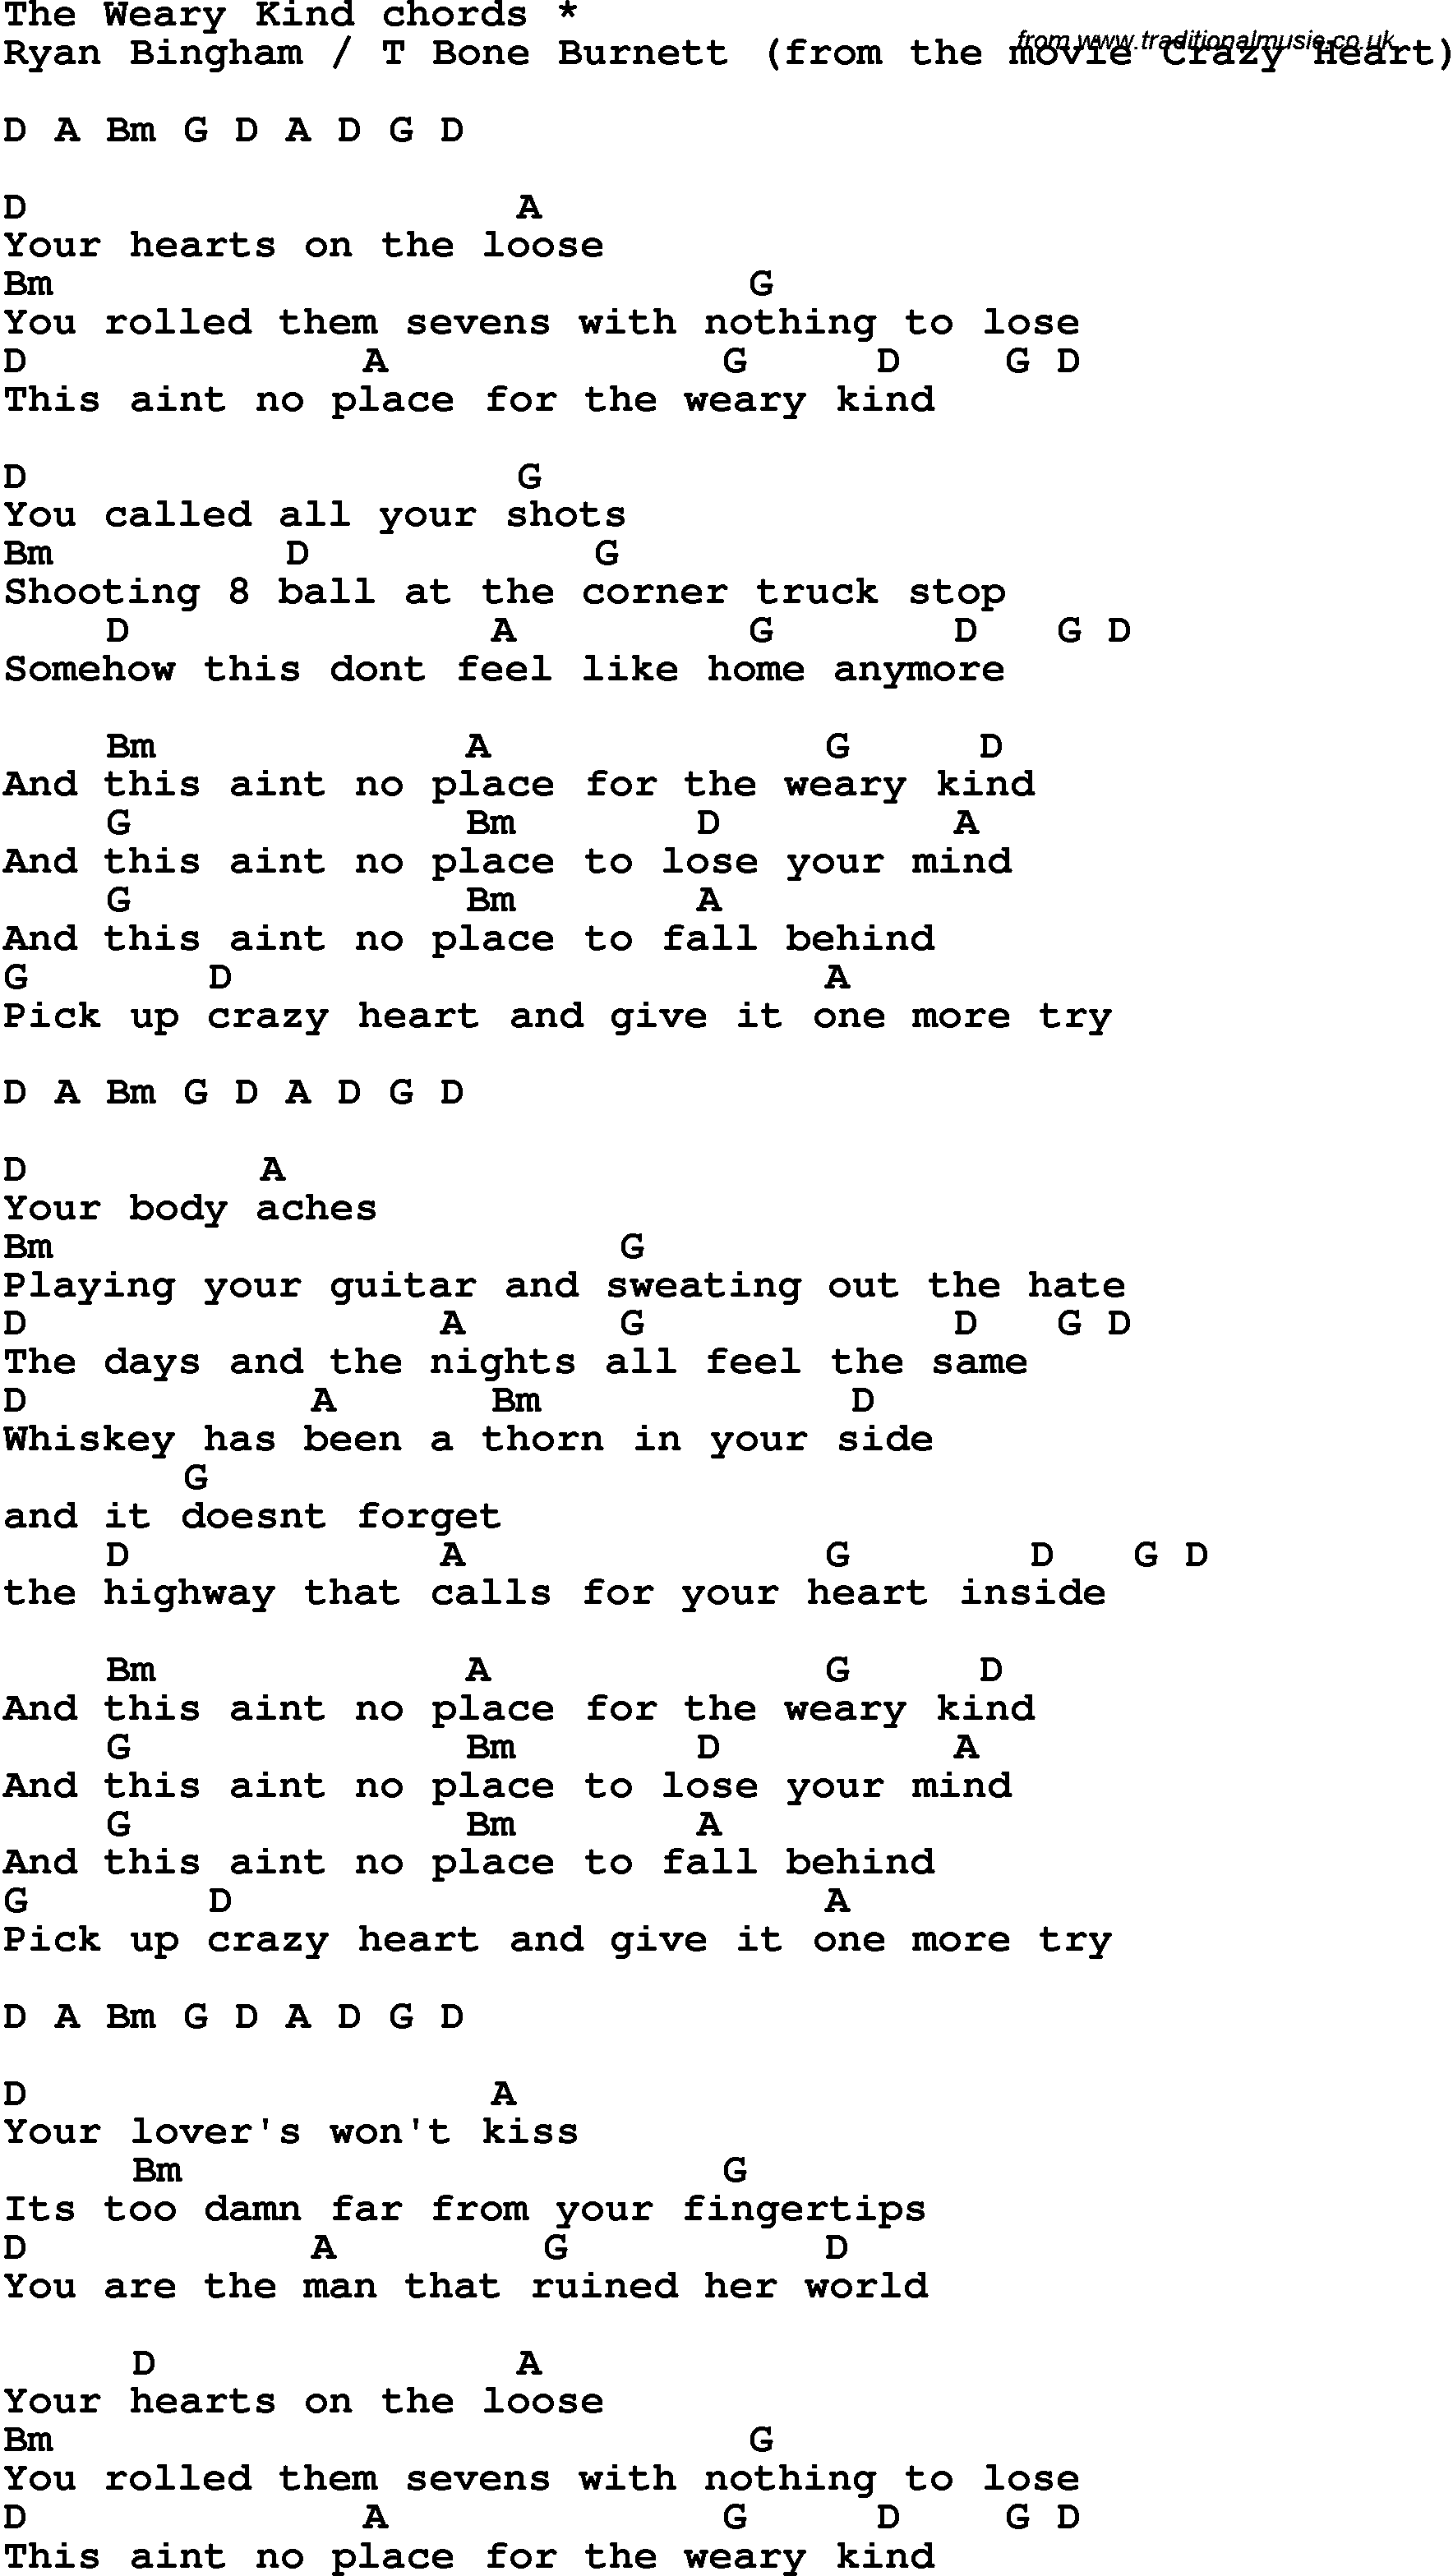 Song Lyrics with guitar chords for The Weary Kind - Ryan Bingham